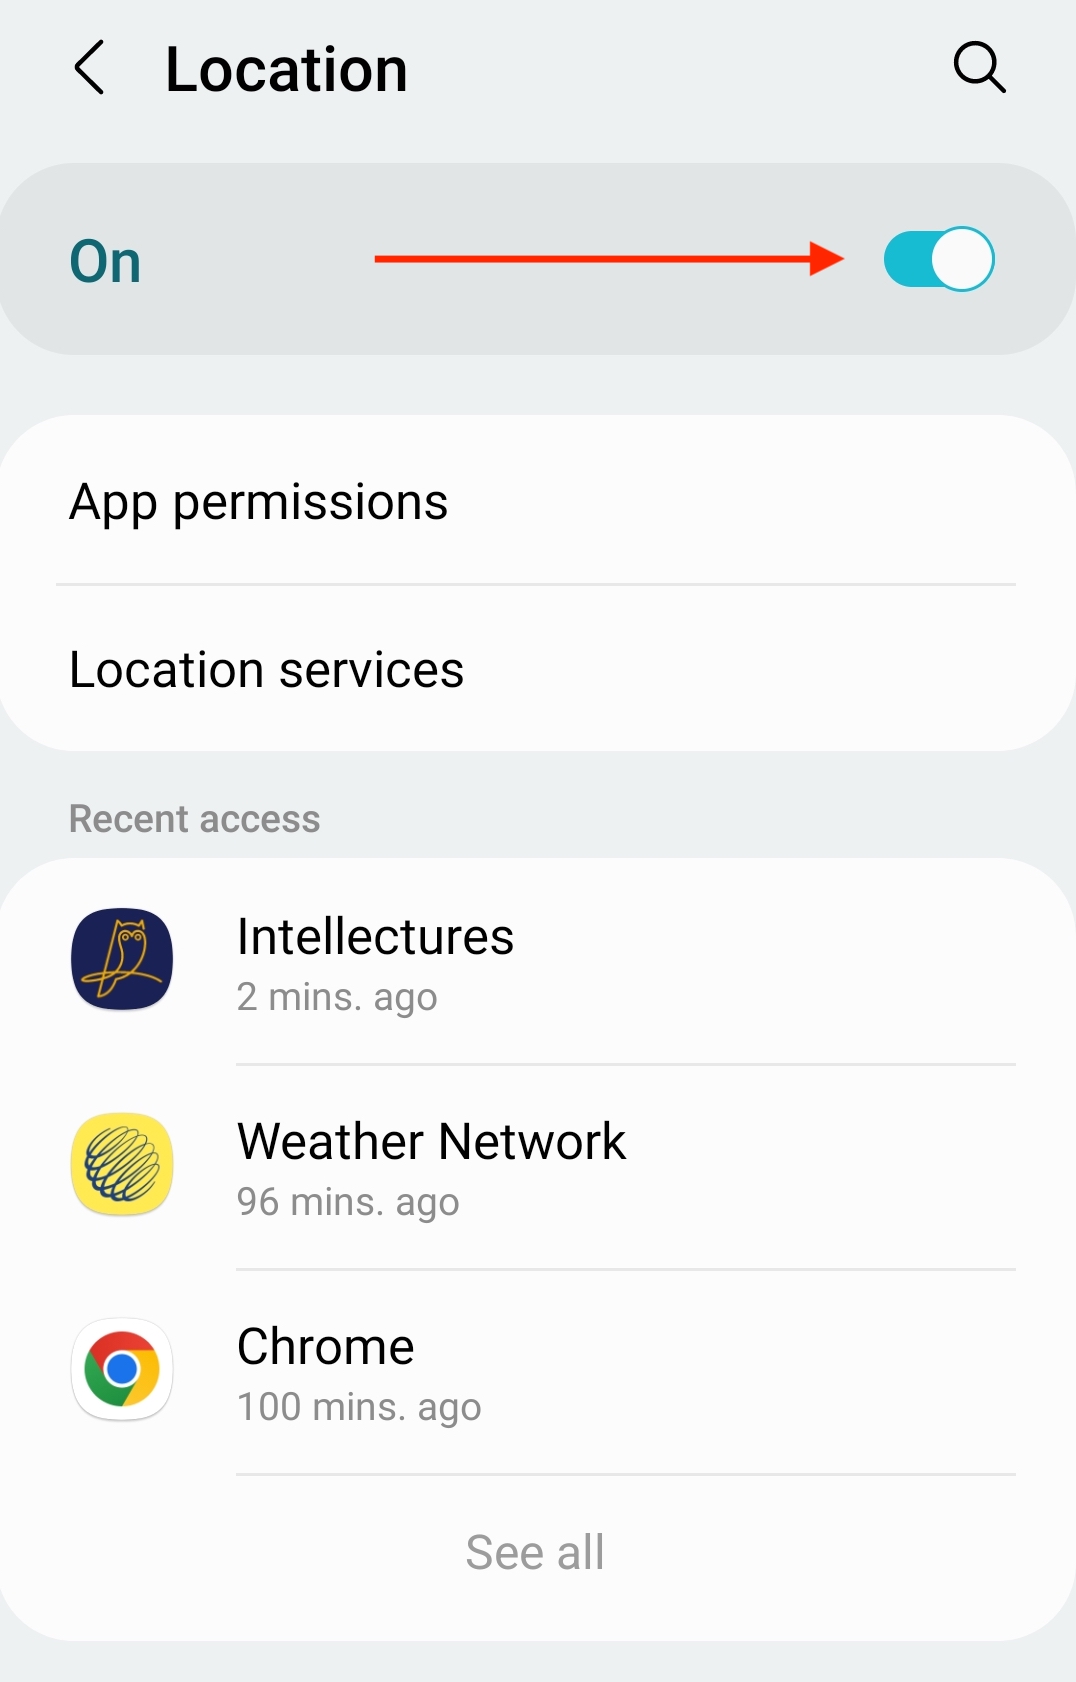 Android-Intelecures-allow-location-sharing